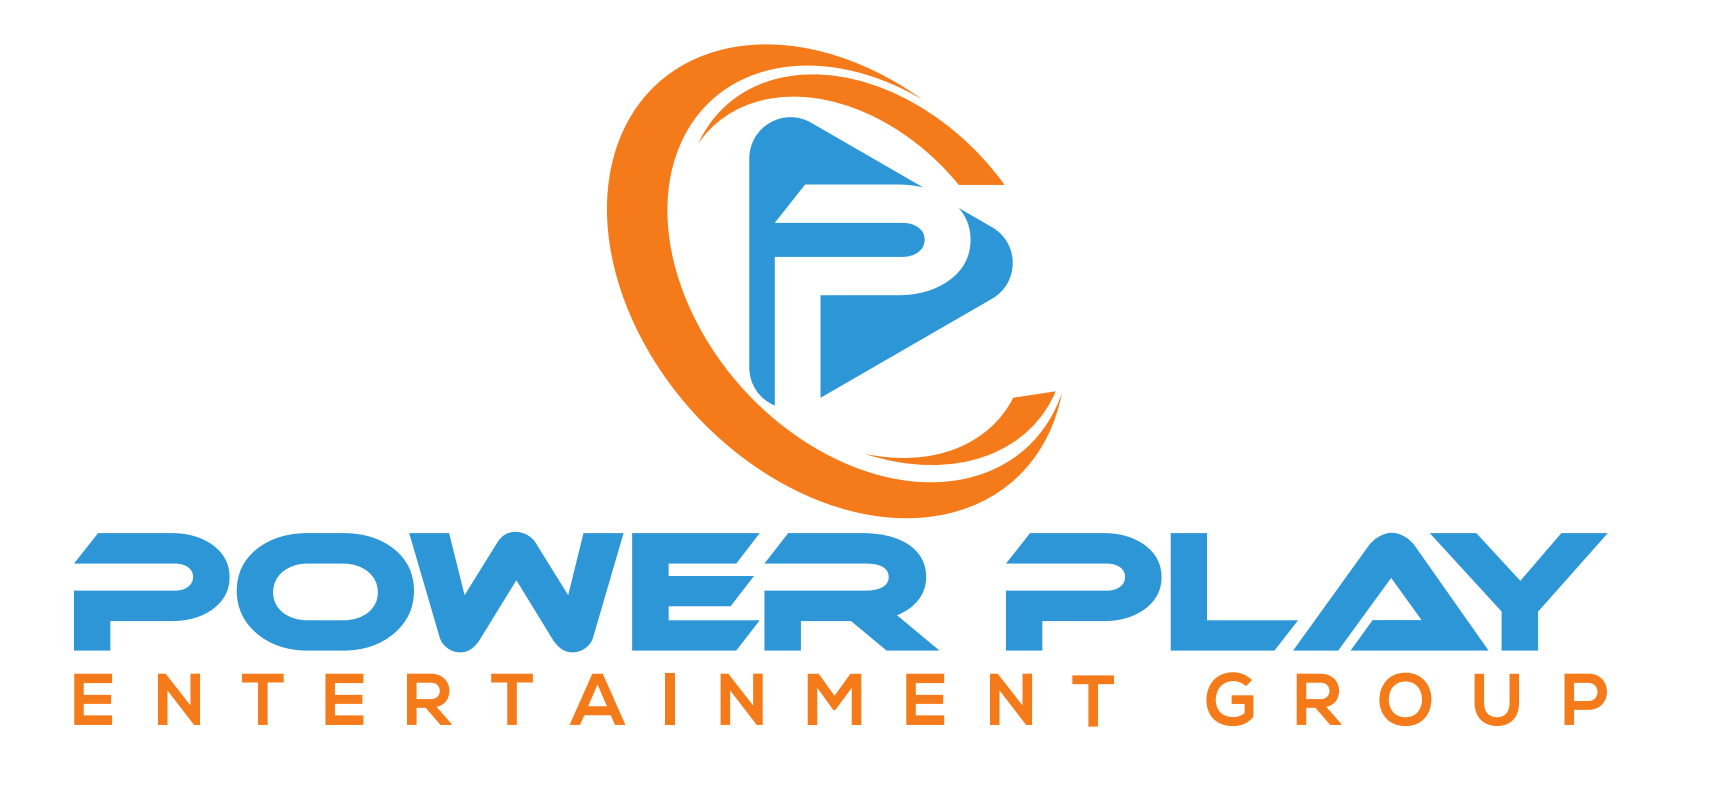 Power Play Entertainment Group